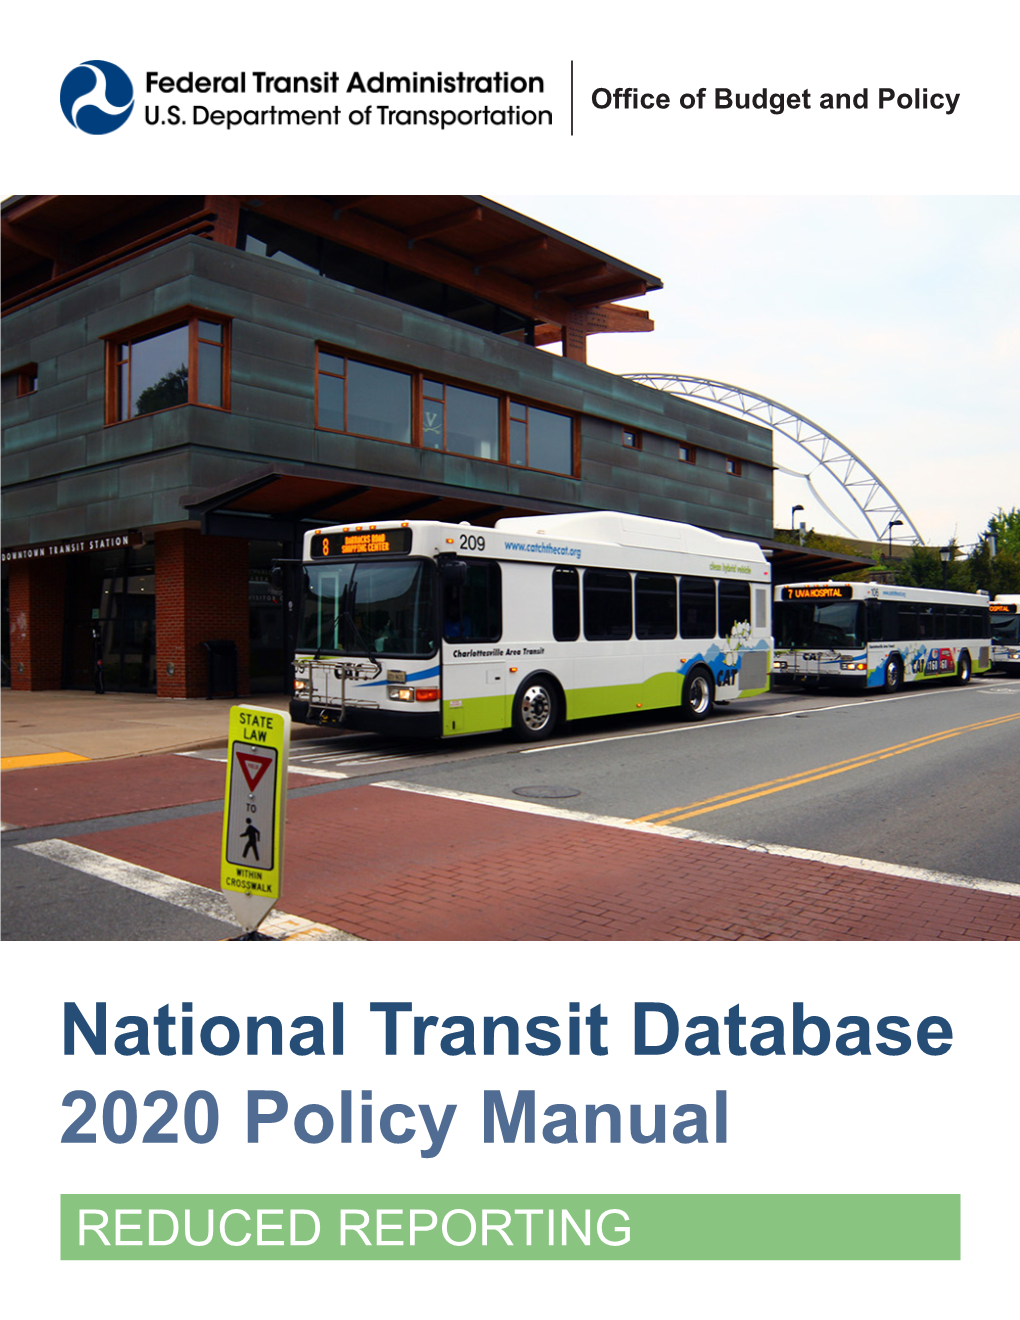 2020 NTD Reduced Reporter Policy Manual